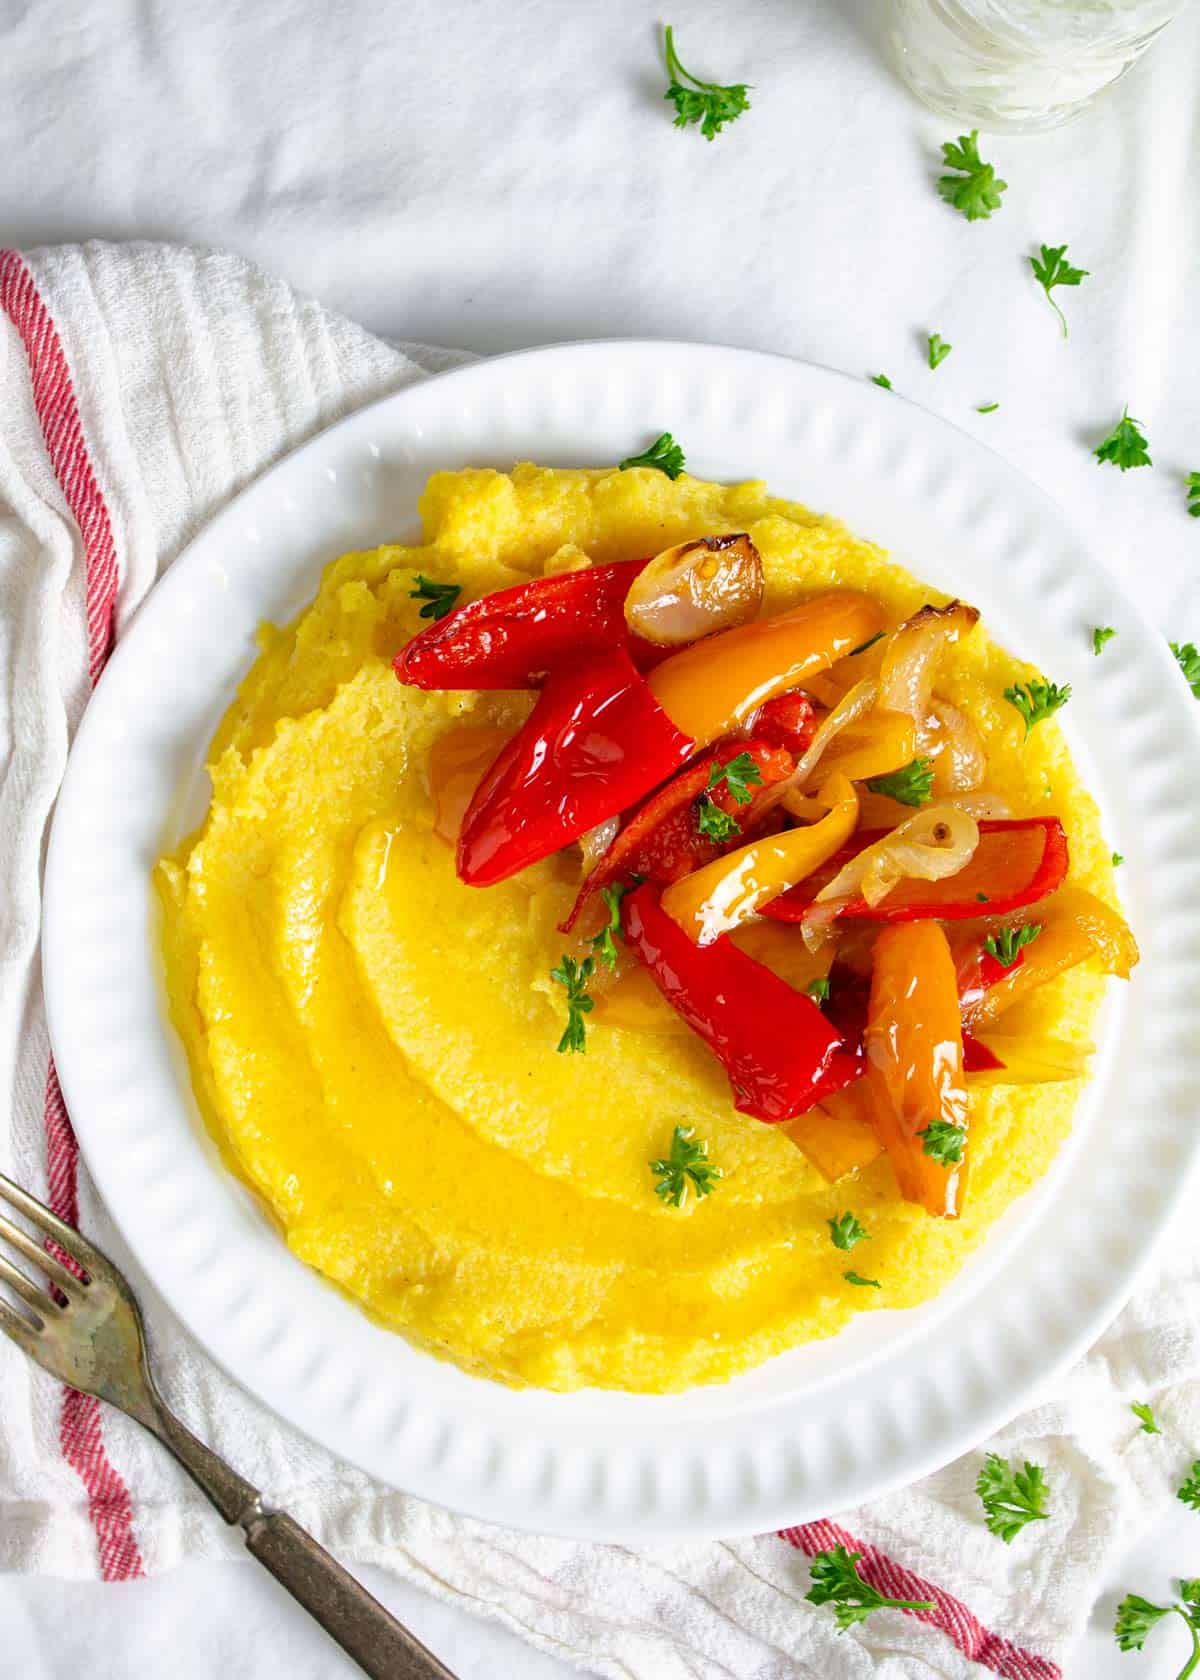 Boiled cornmeal porridge on a plate with roasted peppers and onions.